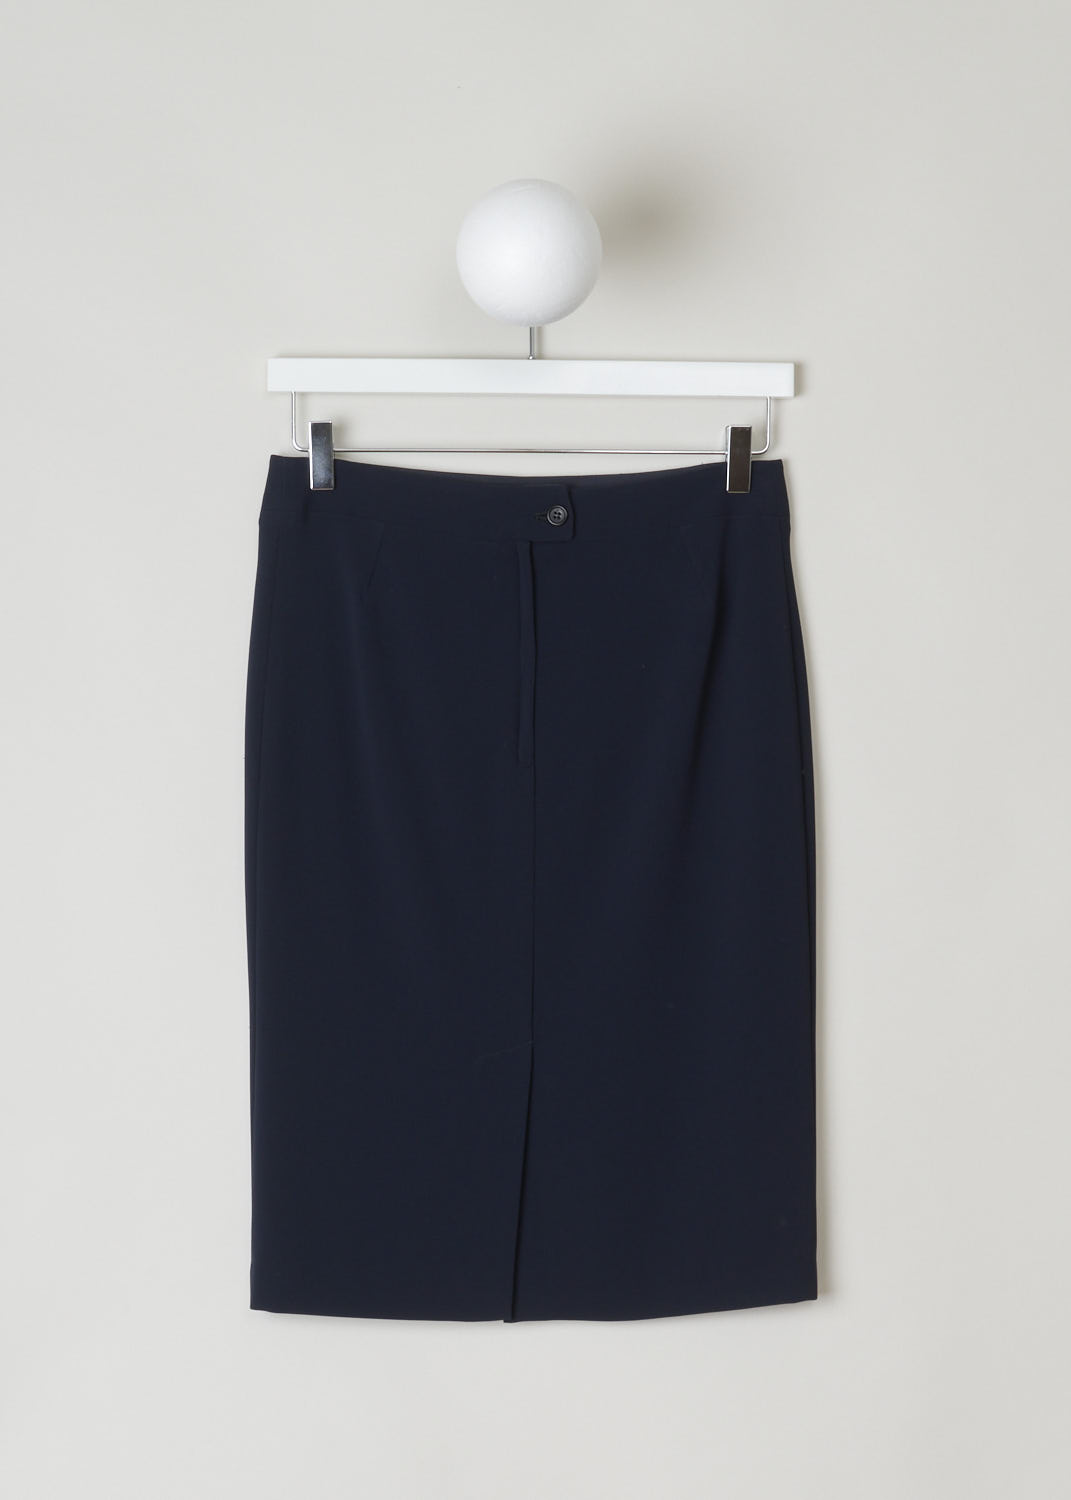 ASPESI, NAVY BLUE PENCIL SKIRT, 2232_2088_10098, Blue. Back, Classic navy blue pencil skirt made from a silky smooth fabric. The skirt has a button and zipper closure in the back. A center slip can also be found in the back.
